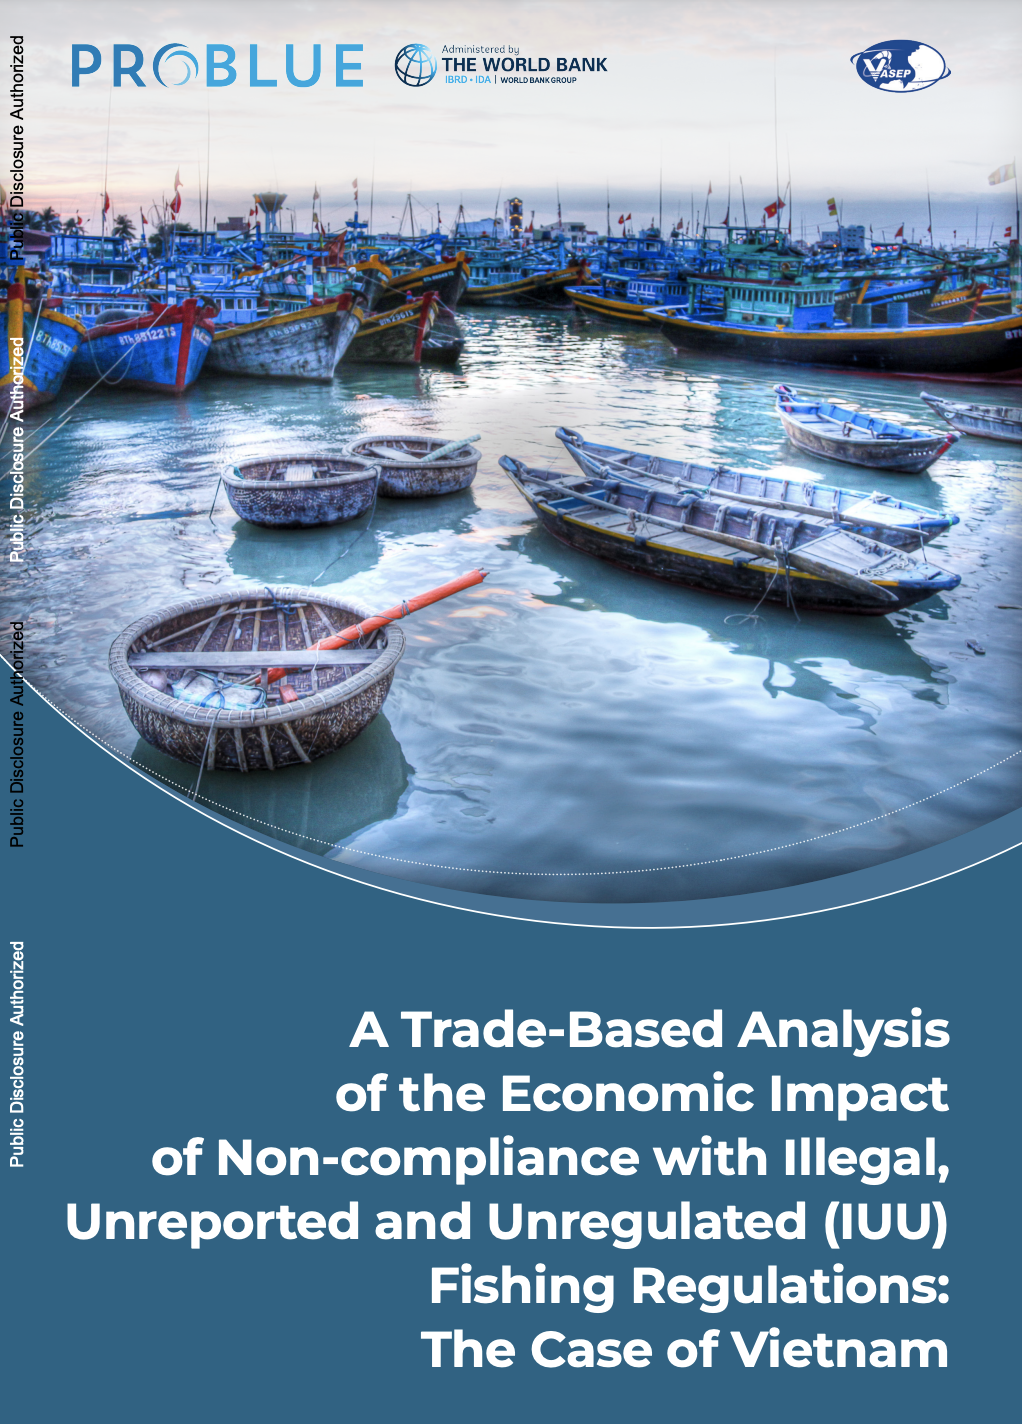 A Trade-Based Analysis of the Economic Impact of Non-Compliance with IUU Fishing: The Case of Vietnam